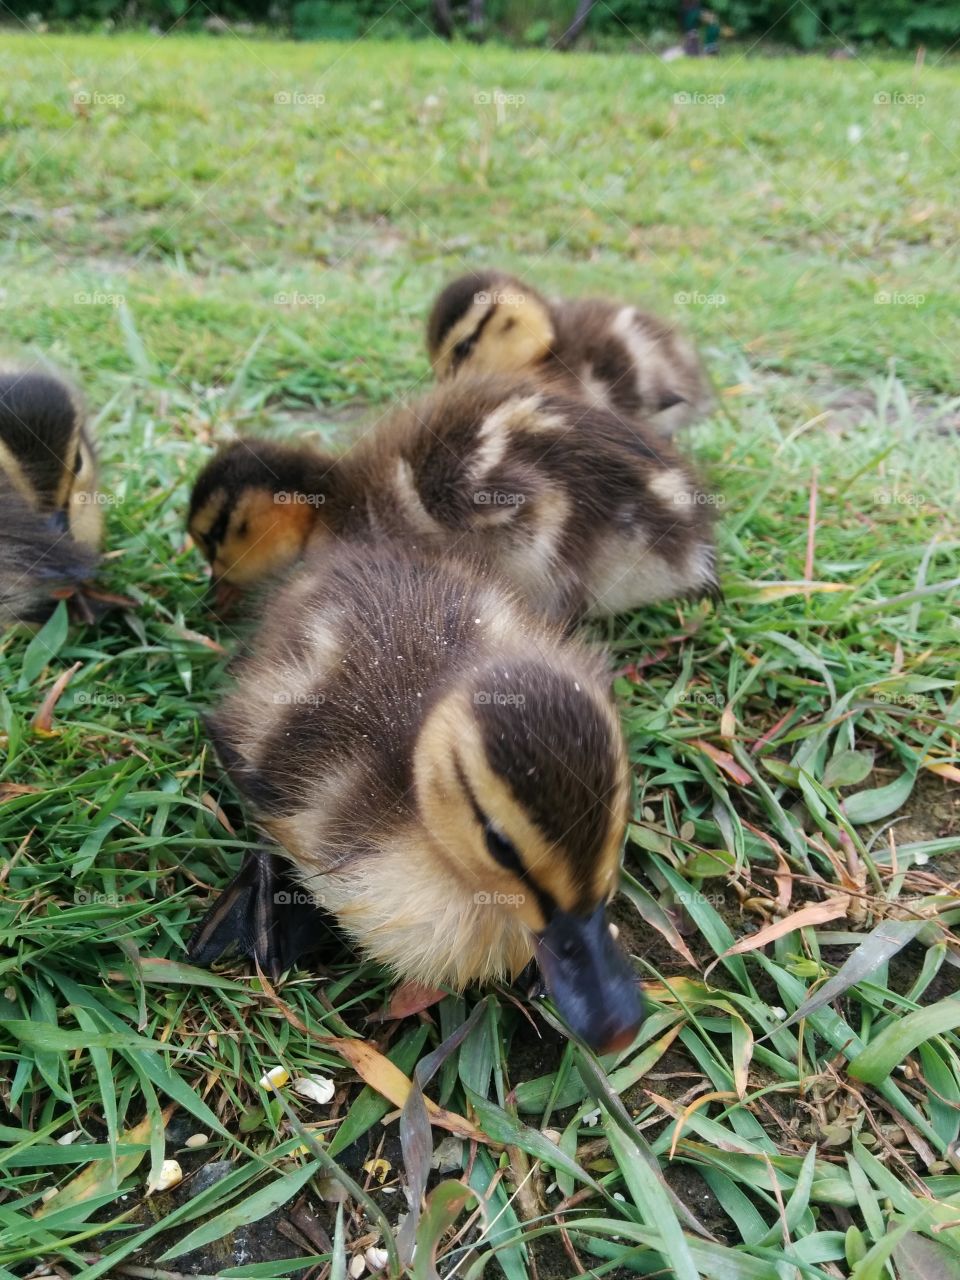 Ducklings eating. duckling eating close up